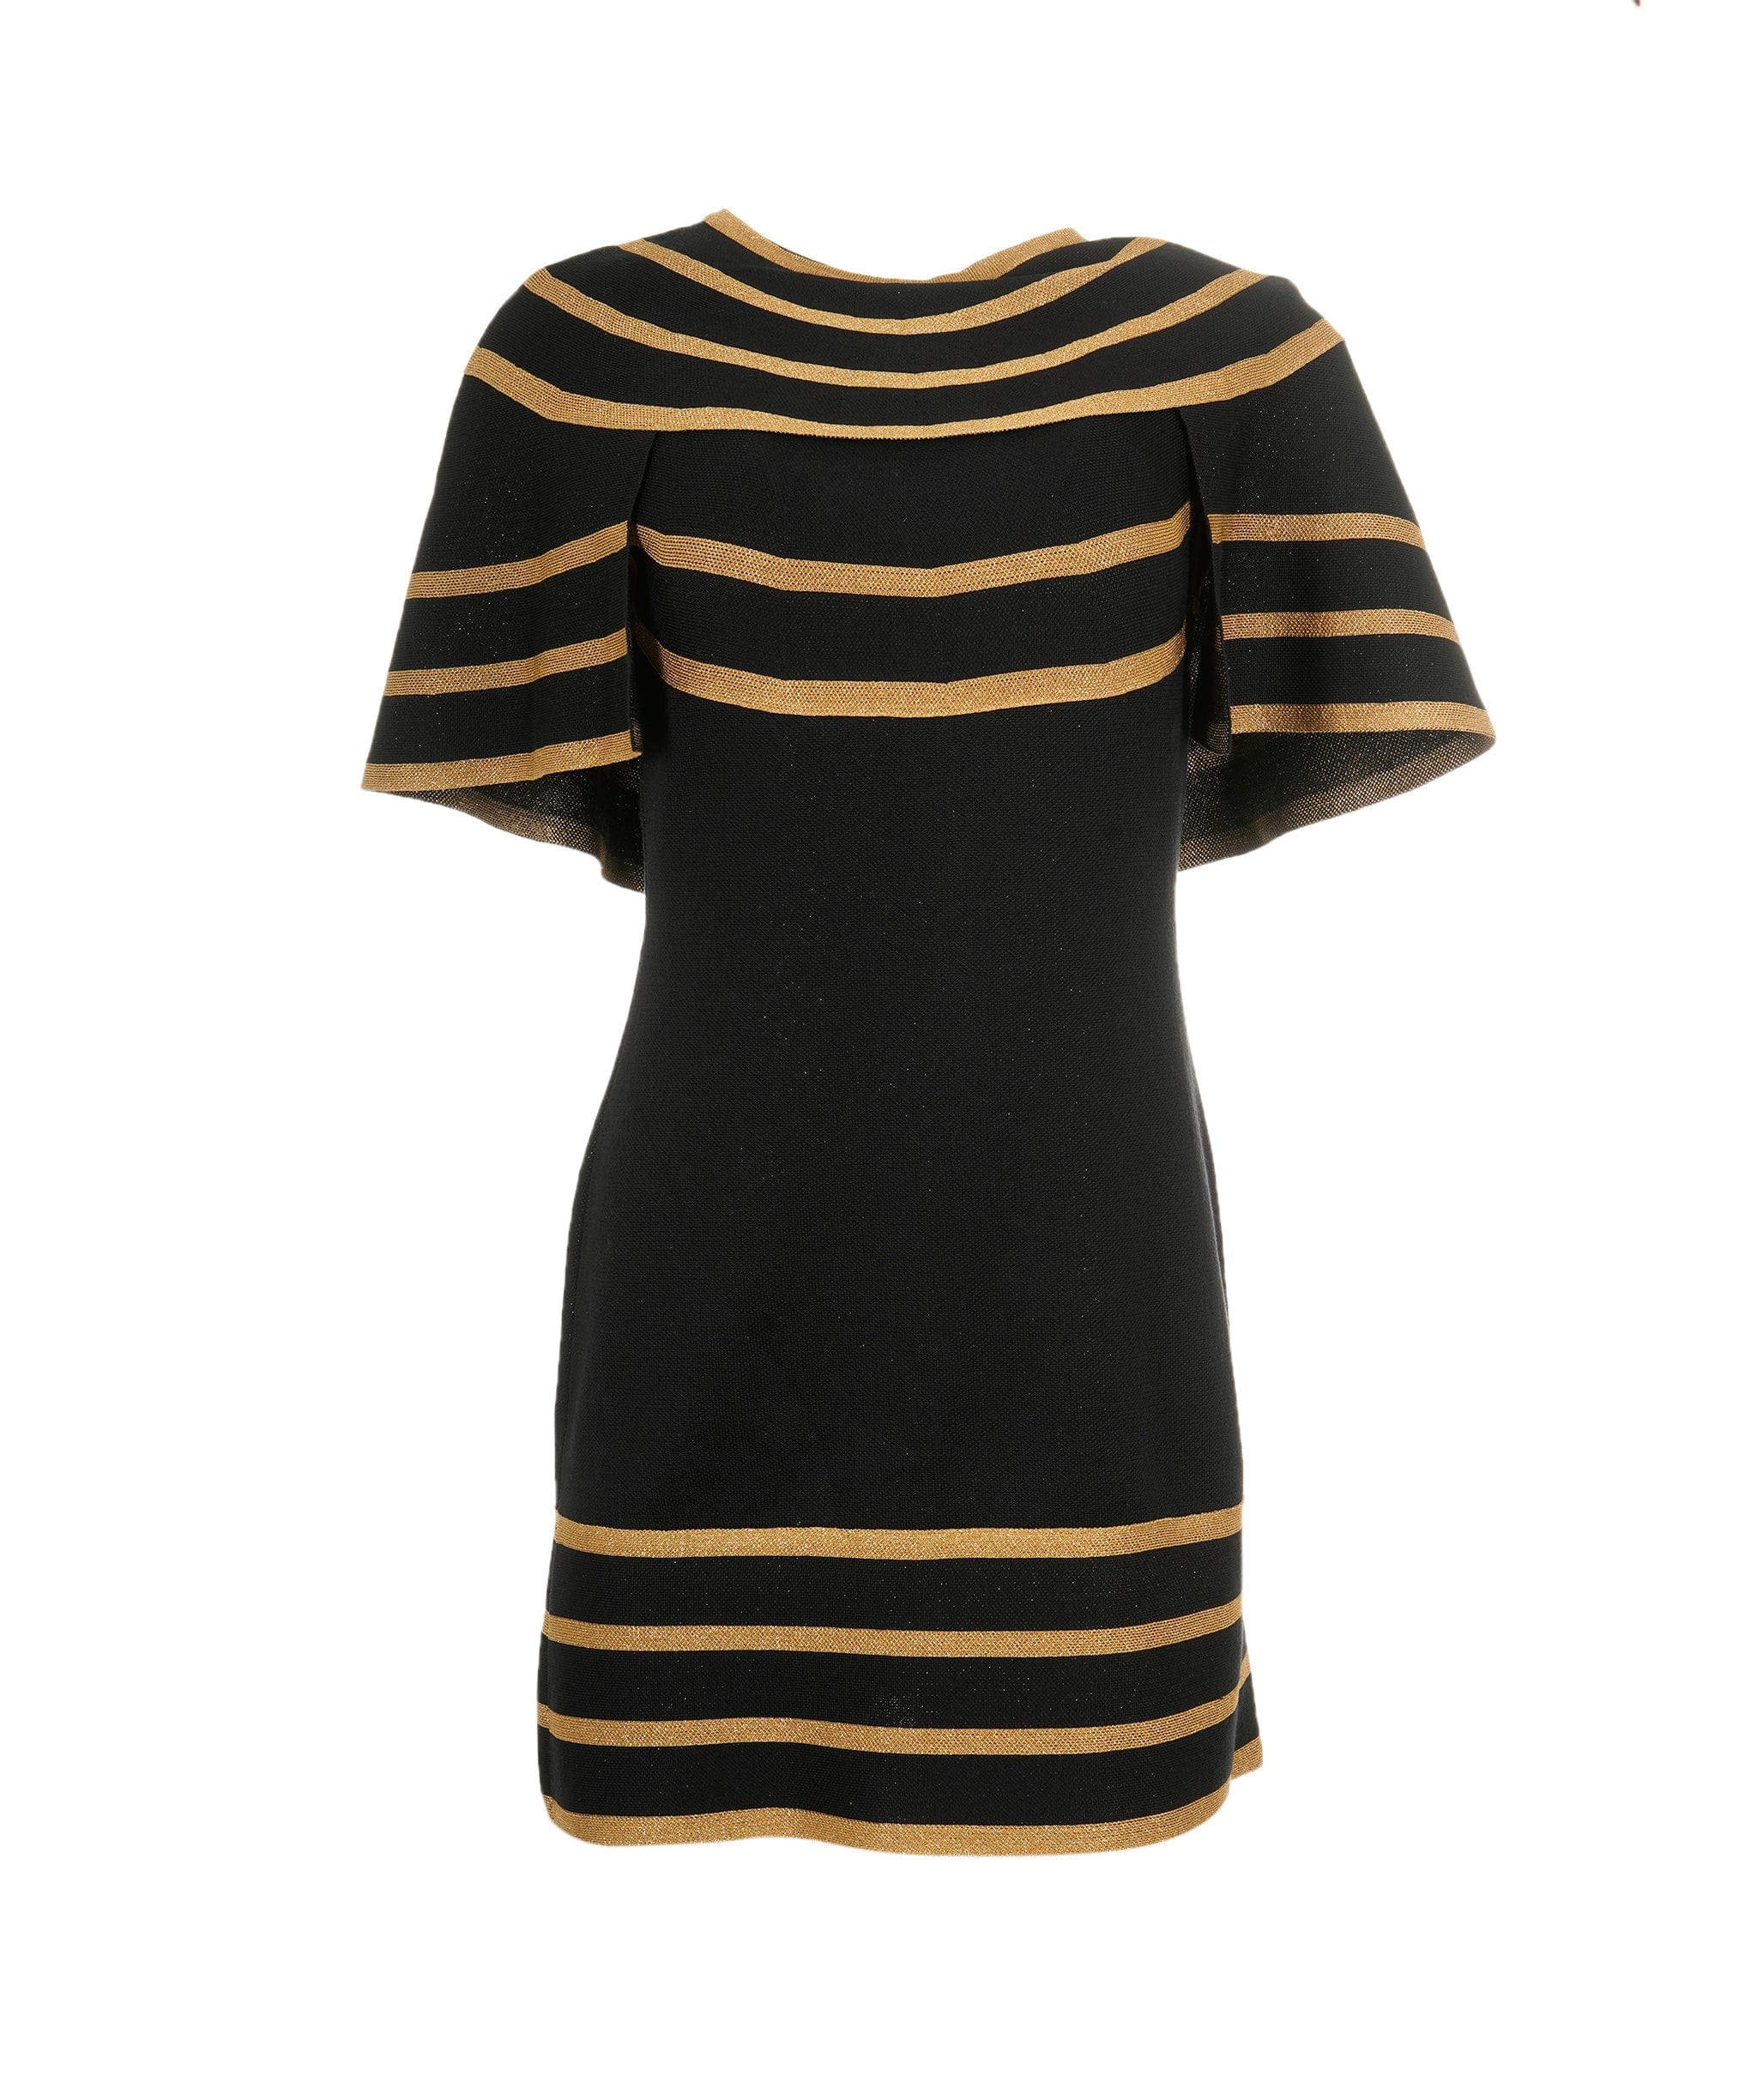 Chanel Chanel Dress black with gold stripes Pre fall 2019 FR34 AVC1247